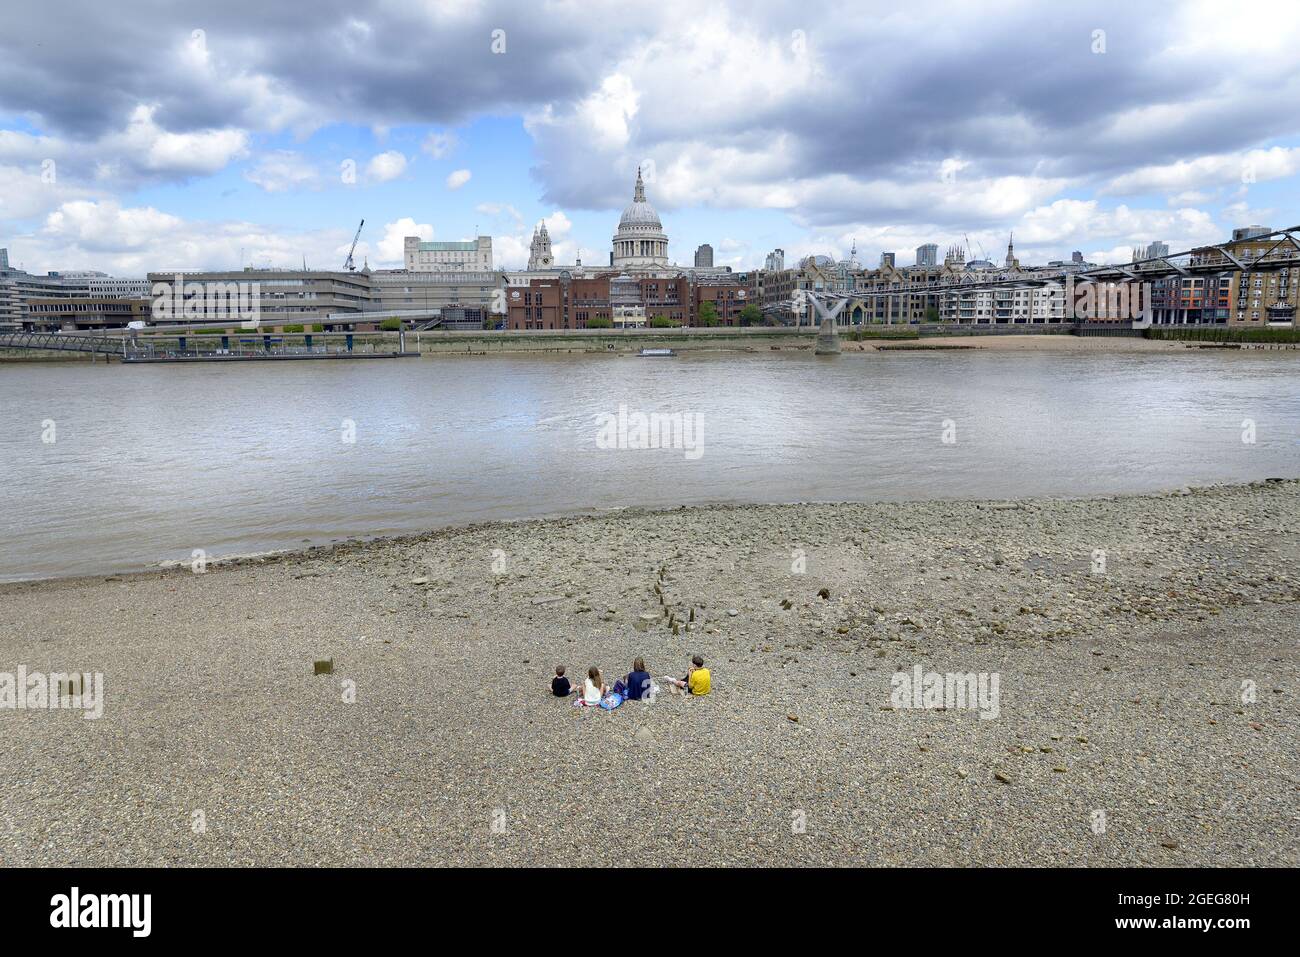 London, England, UK. People on the beach on the South Bank of the River Thames at low tide, looking towards St Paul's Cathedral and the City of London Stock Photo